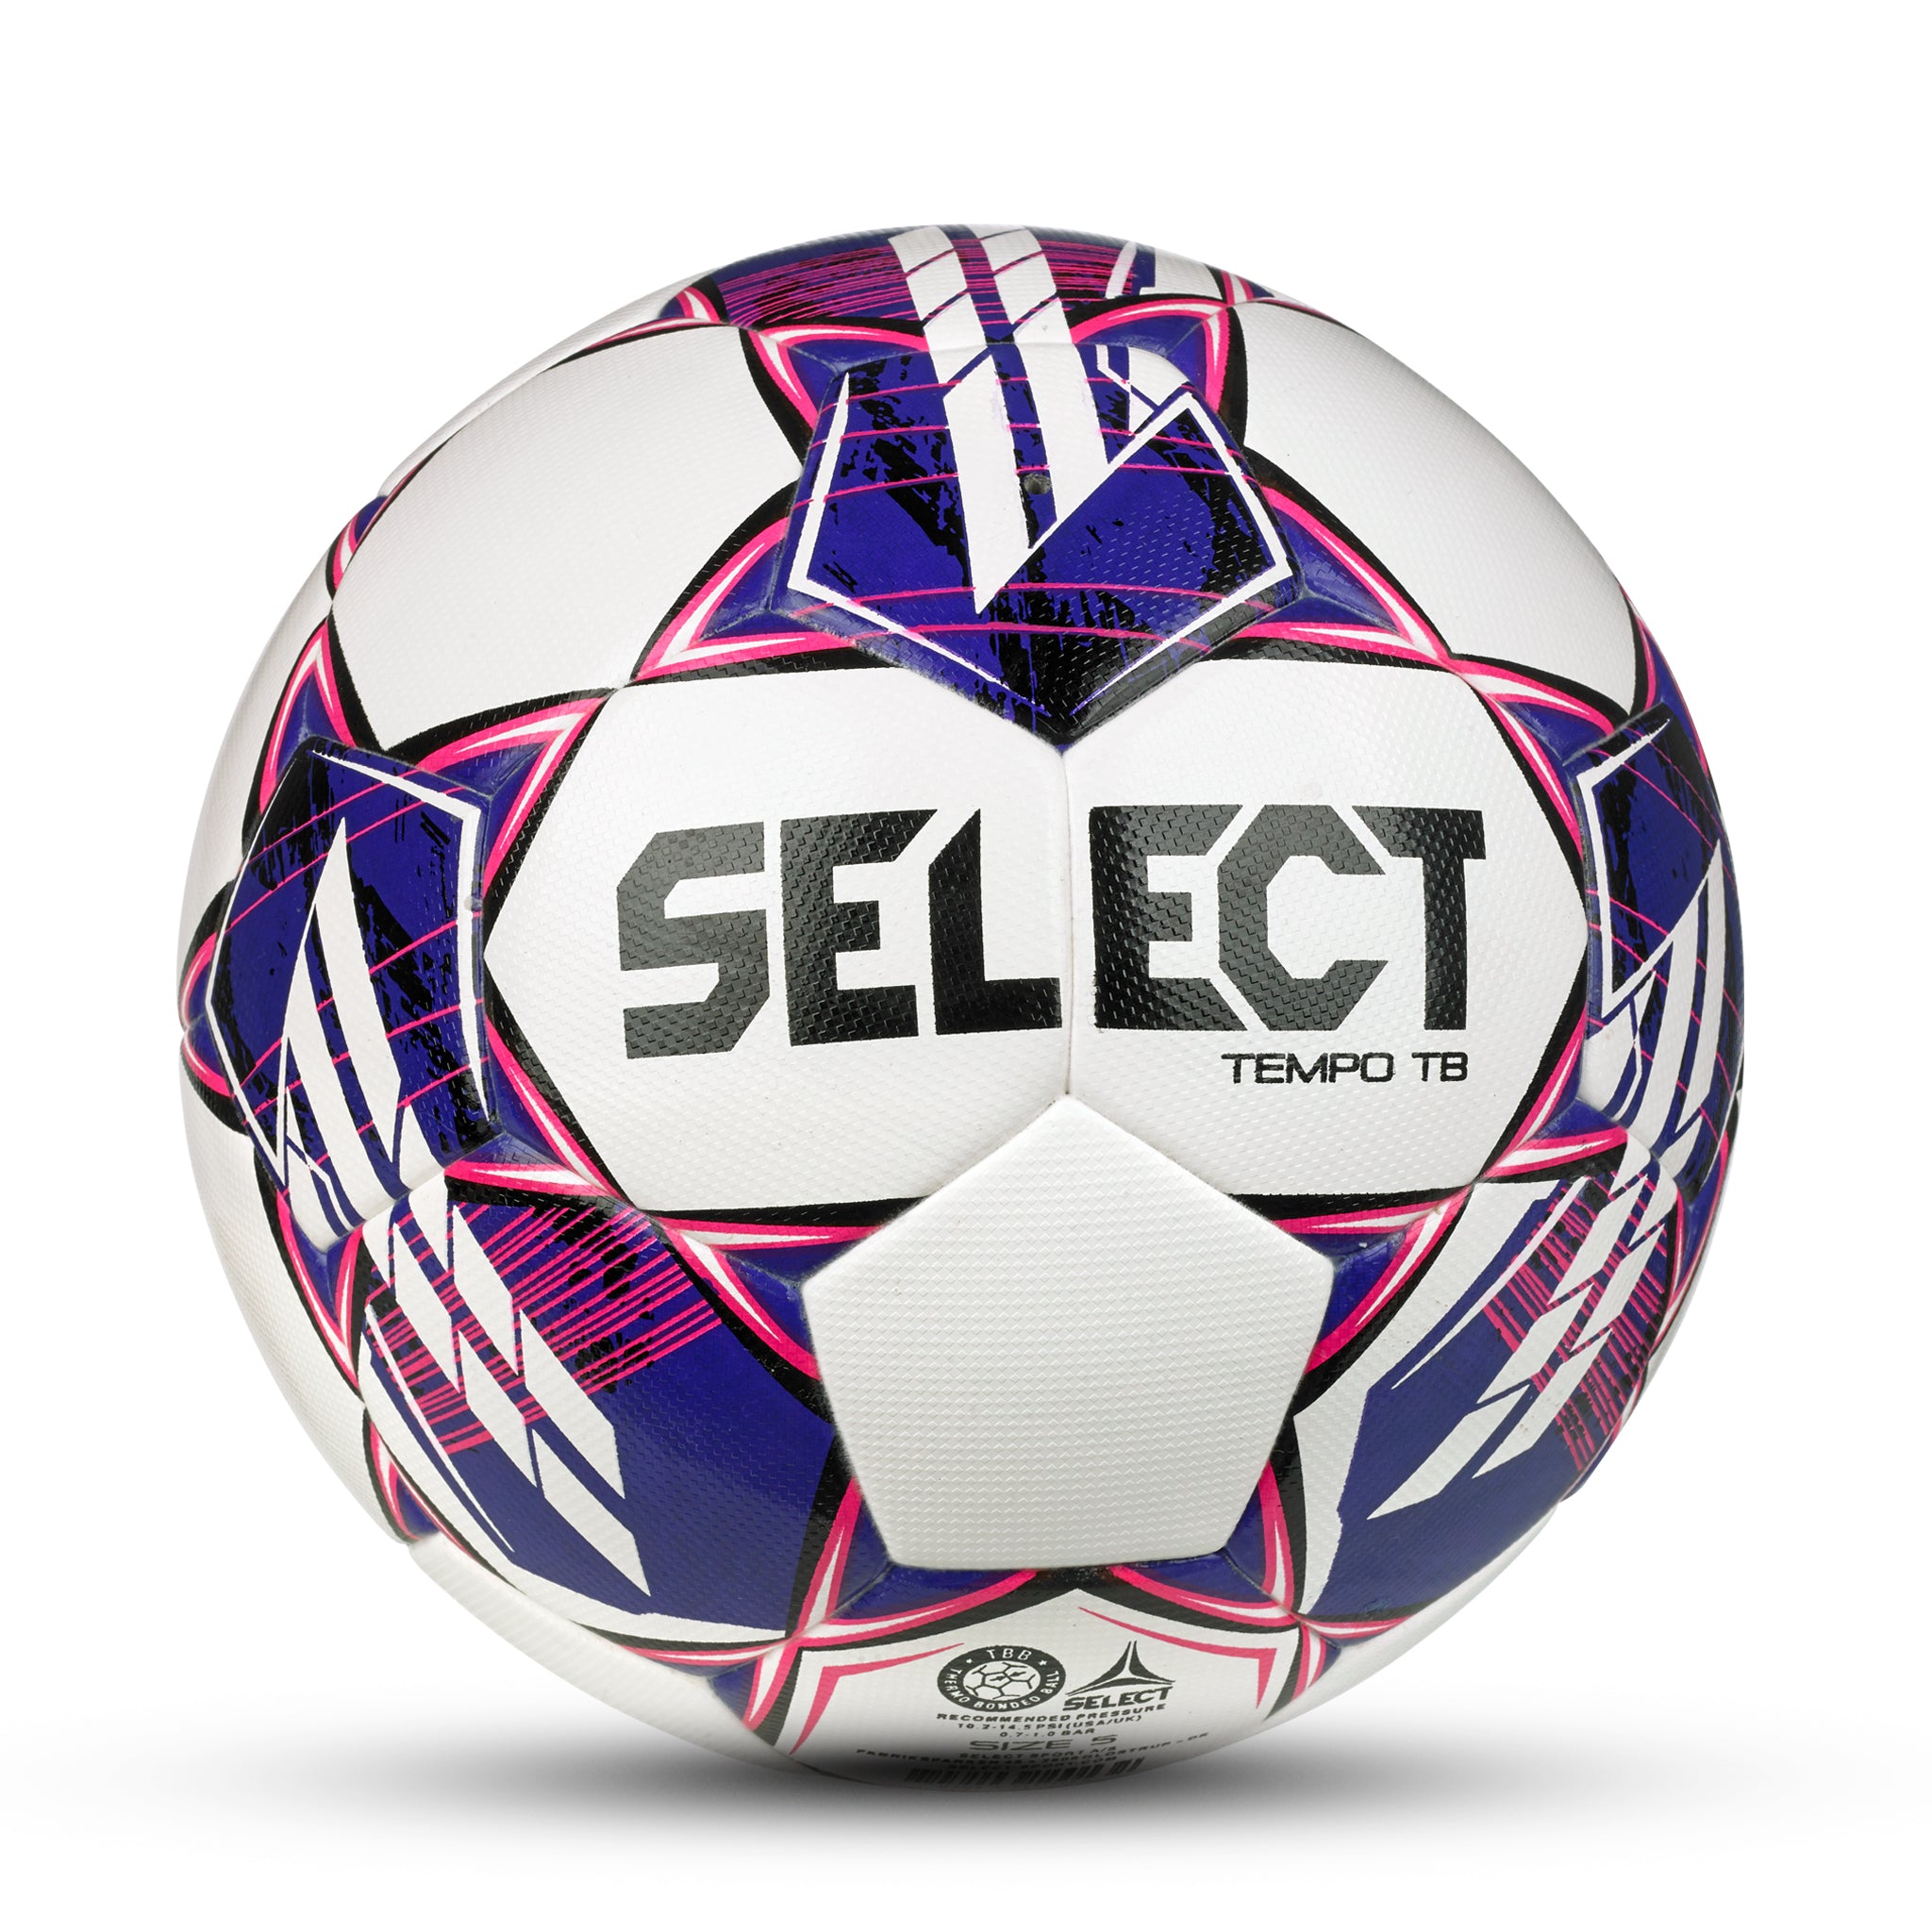 White club soccer ball #color_white/pink/purple